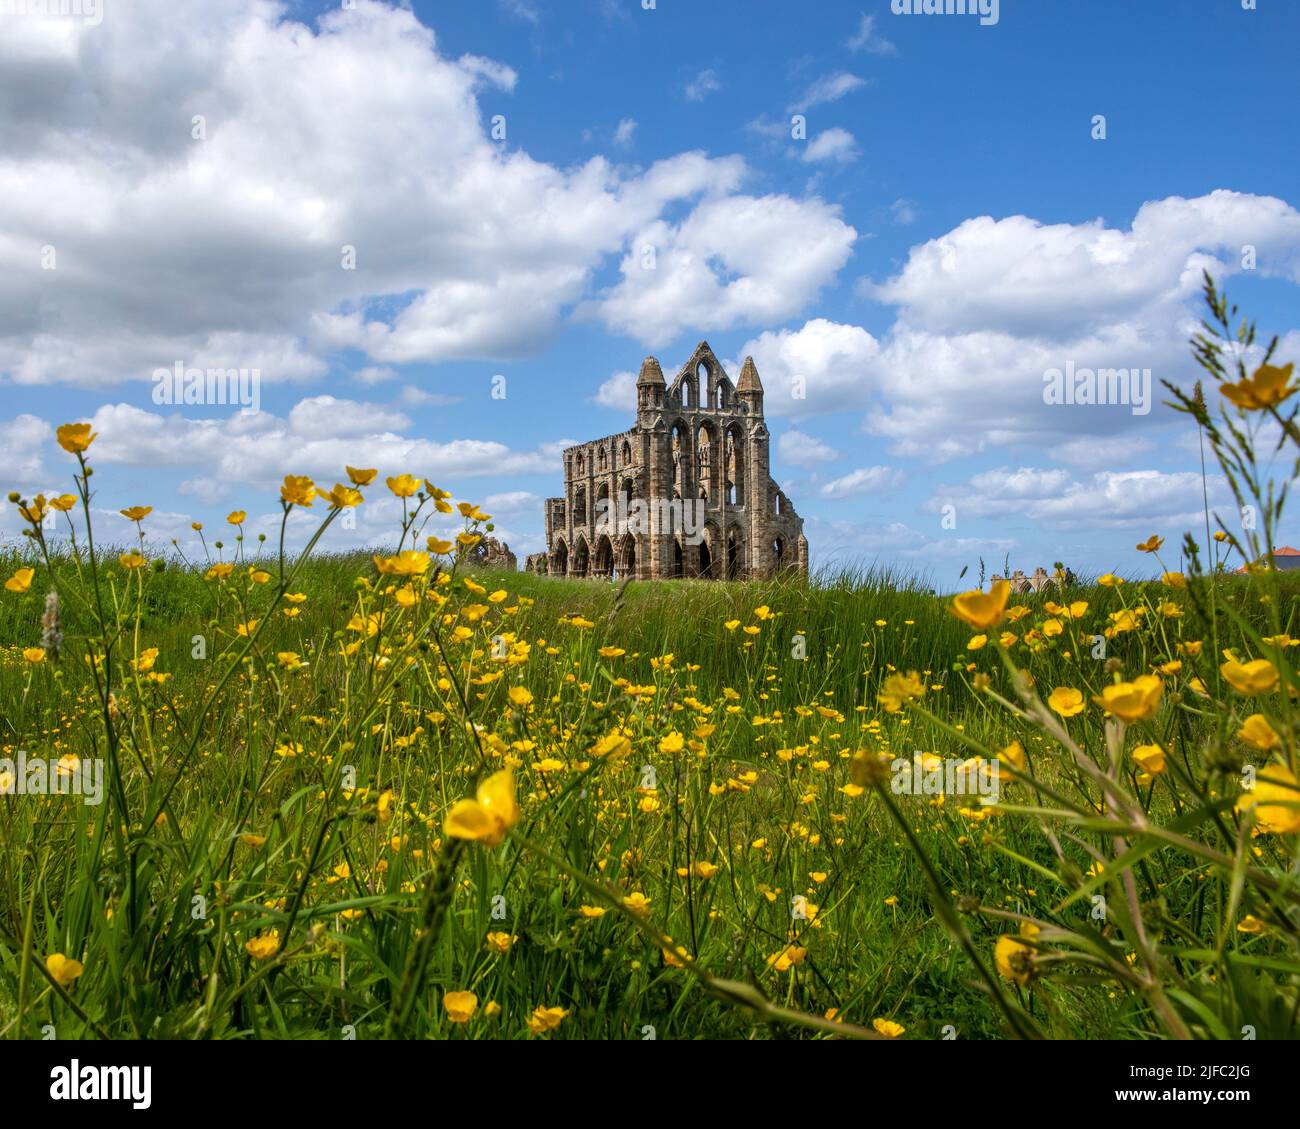 View of the historic Whitby Abbey in the town of Whitby in North Yorkshire, UK. Stock Photo